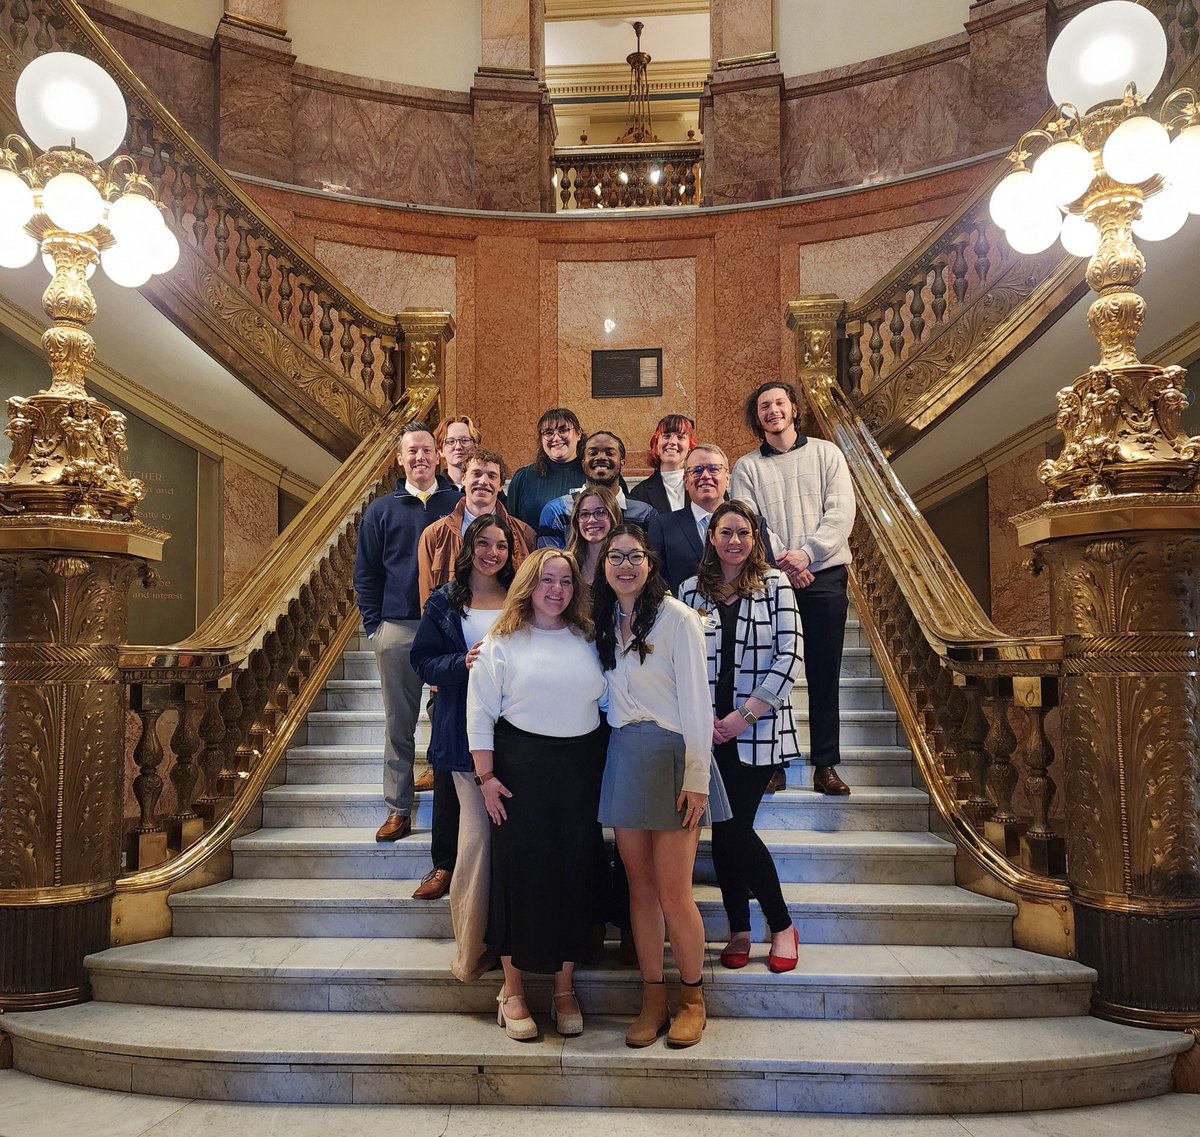 I was back at the state Capitol today with a group of exceptional @UNC_Colorado students, including members of @UNCO_sga. They spoke with elected officials about the importance of keeping higher education accessible and affordable. Go Bears!